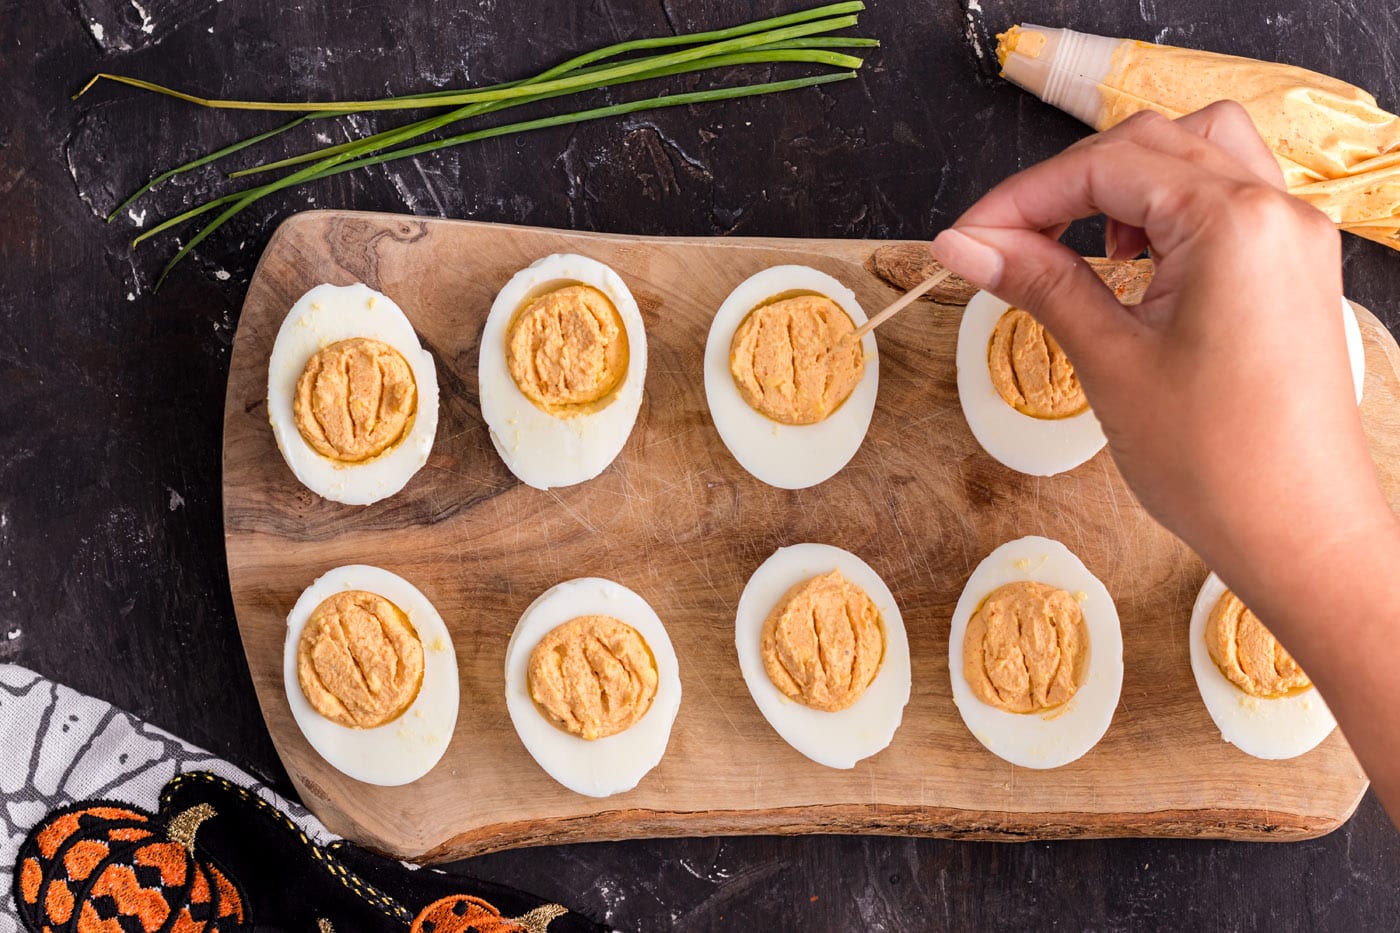 adding ridges with a toothpick to deviled eggs